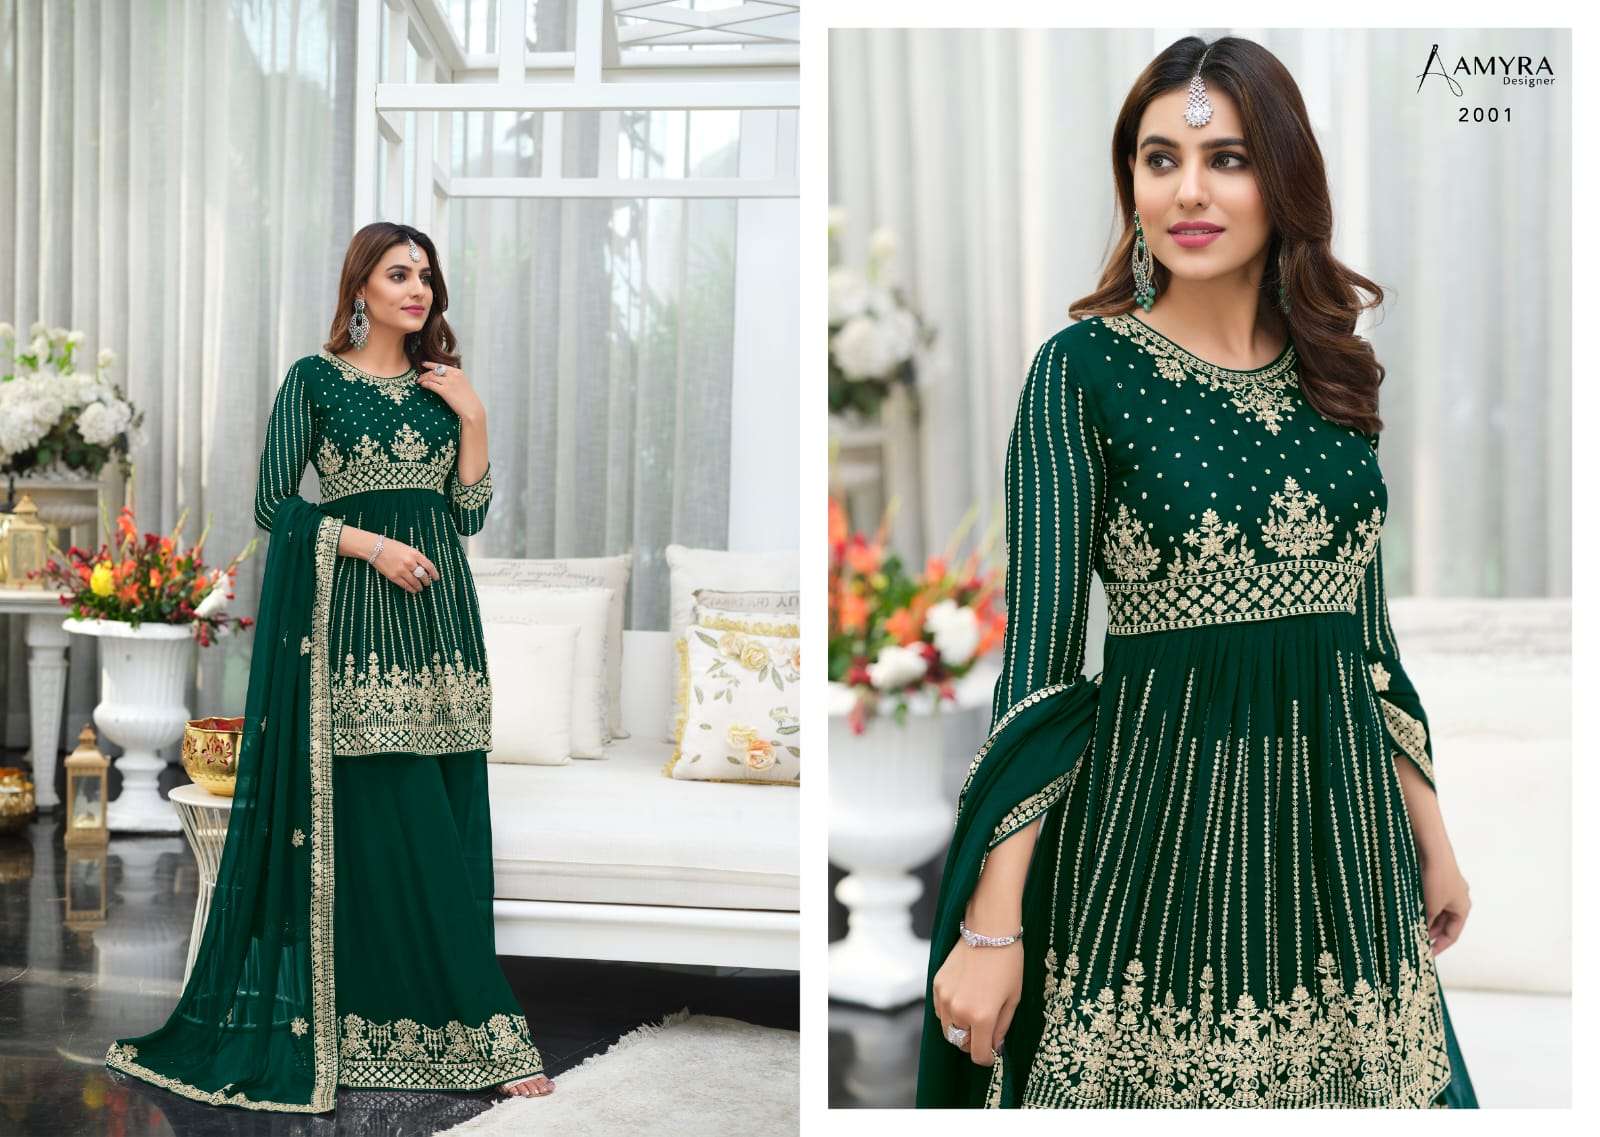 Pakistani Gharara Style Dress for Wedding Party – Nameera by Farooq